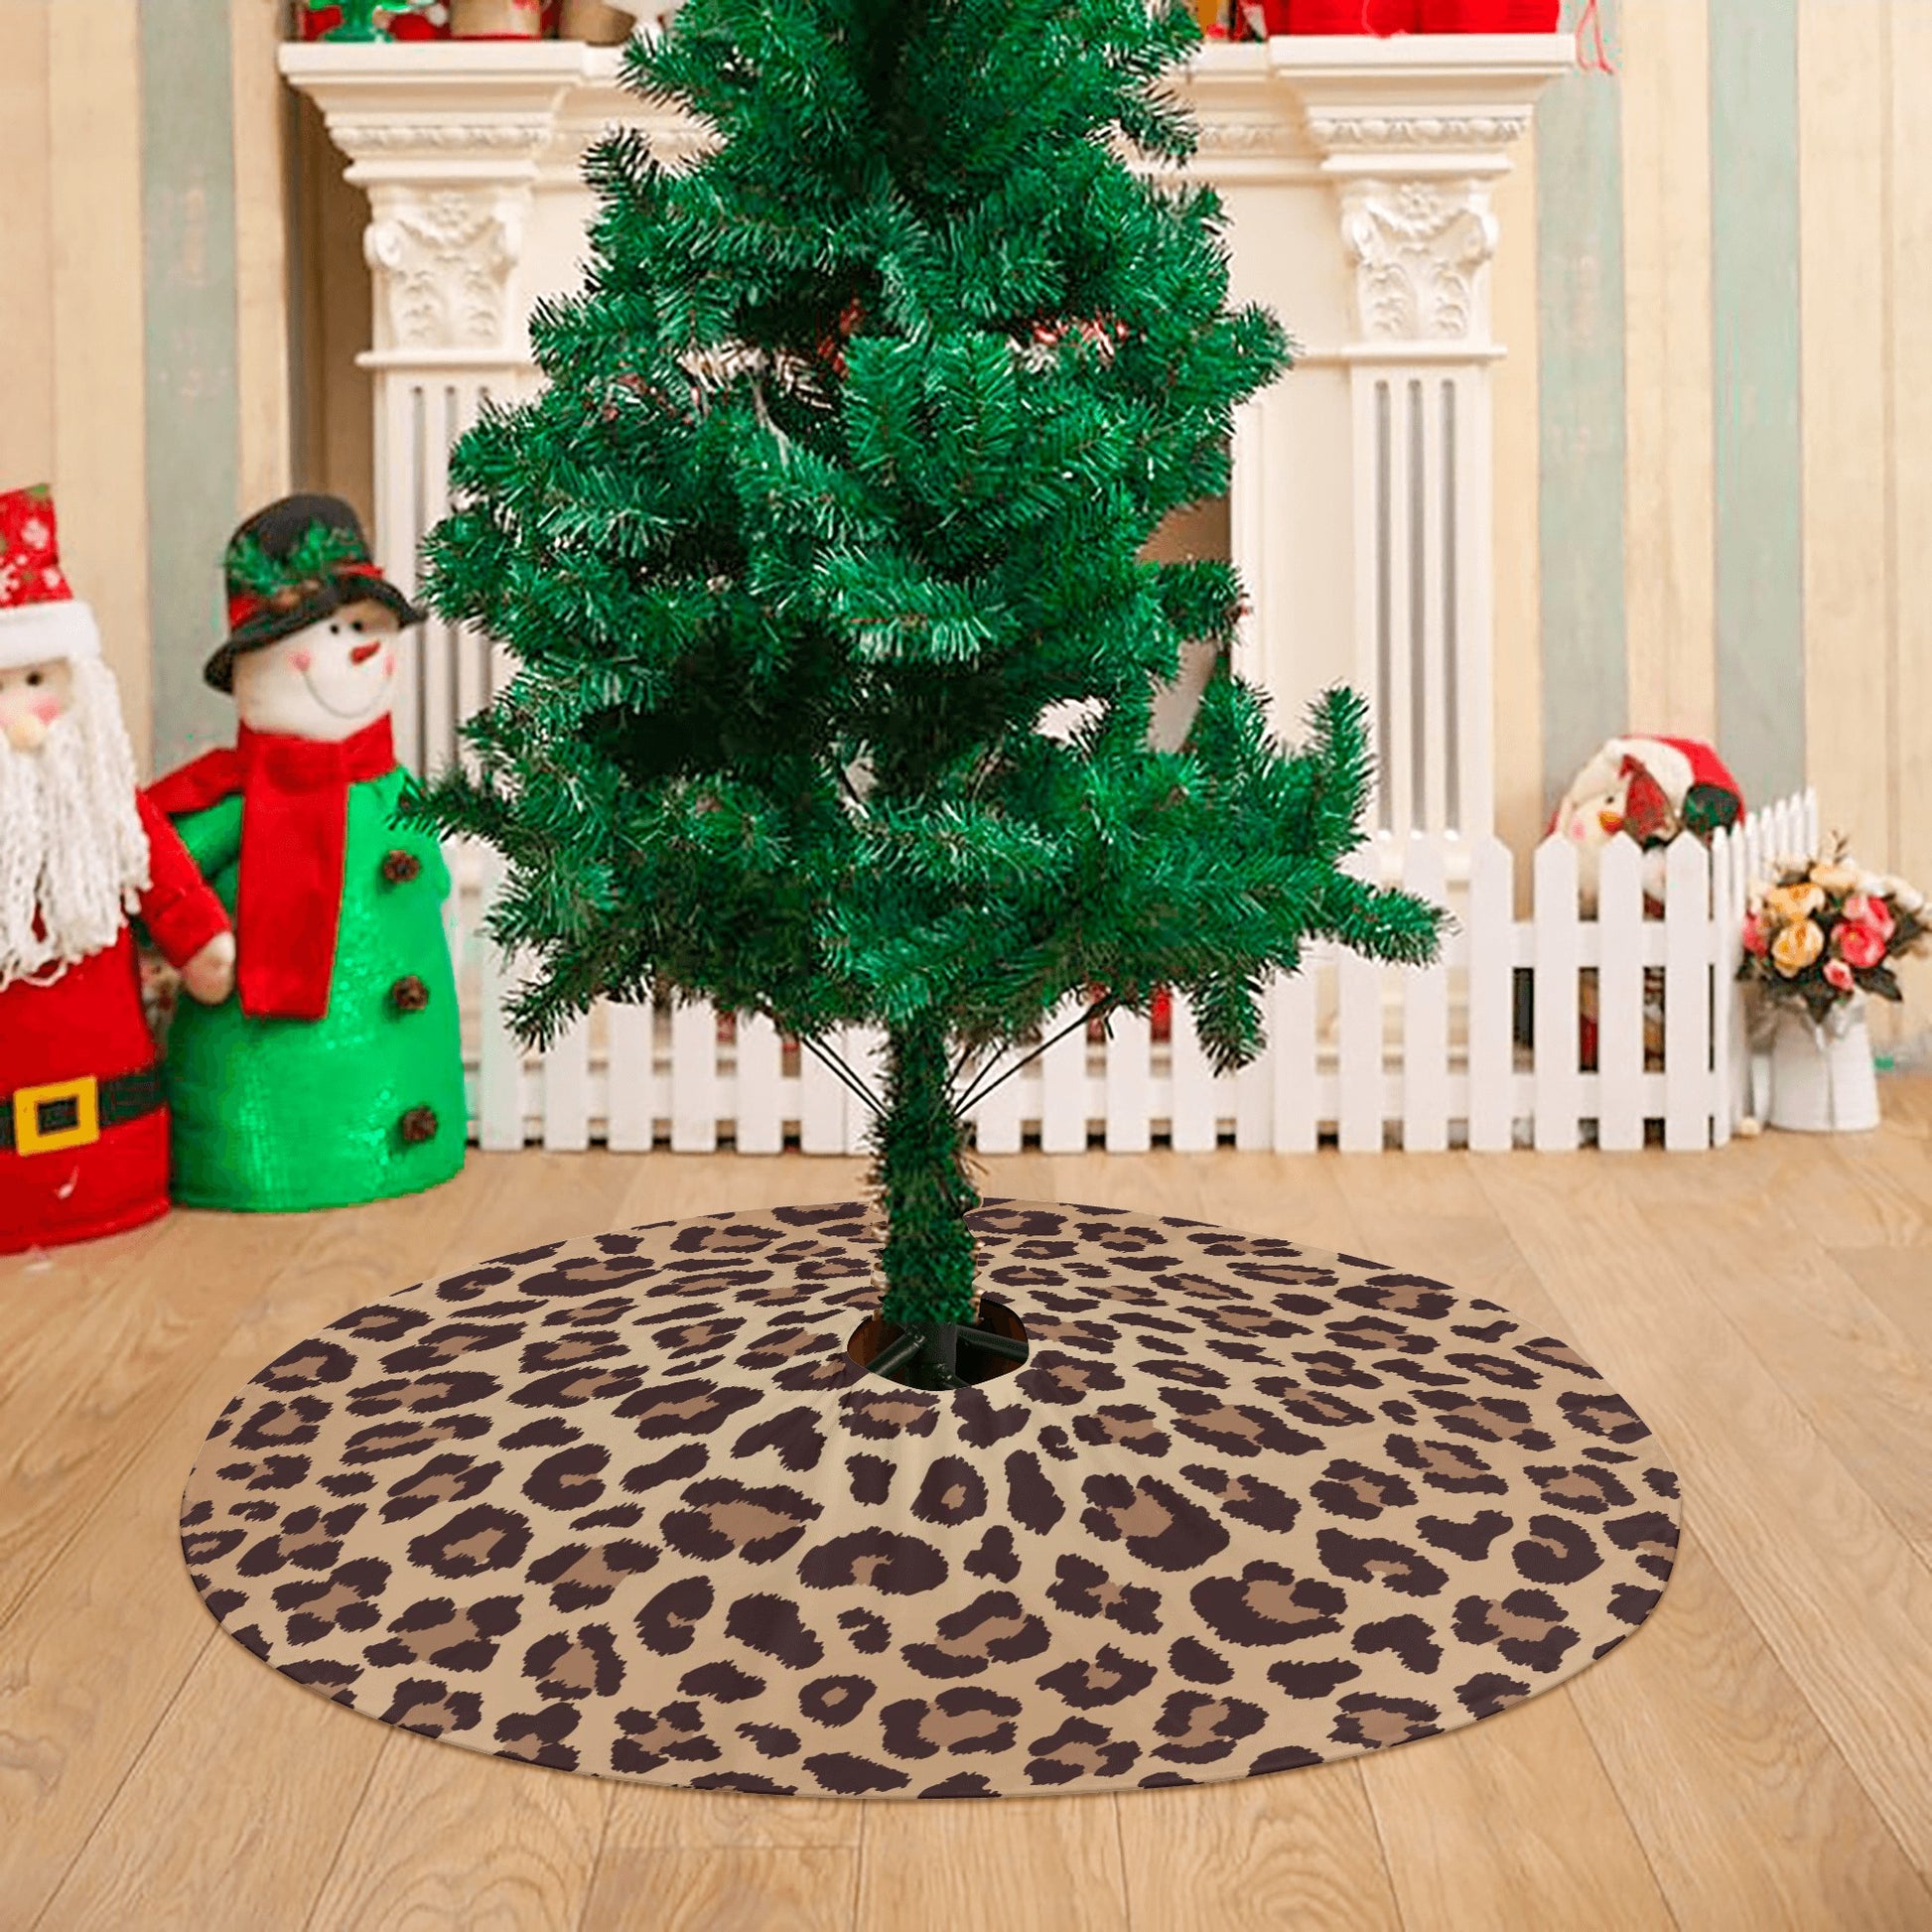 Leopard Christmas Tree Skirt, Animal Cheetah Print Vintage Xmas Cover Decor Decoration 30 36 48 Inch Small Large Party Modern Decoration Starcove Fashion